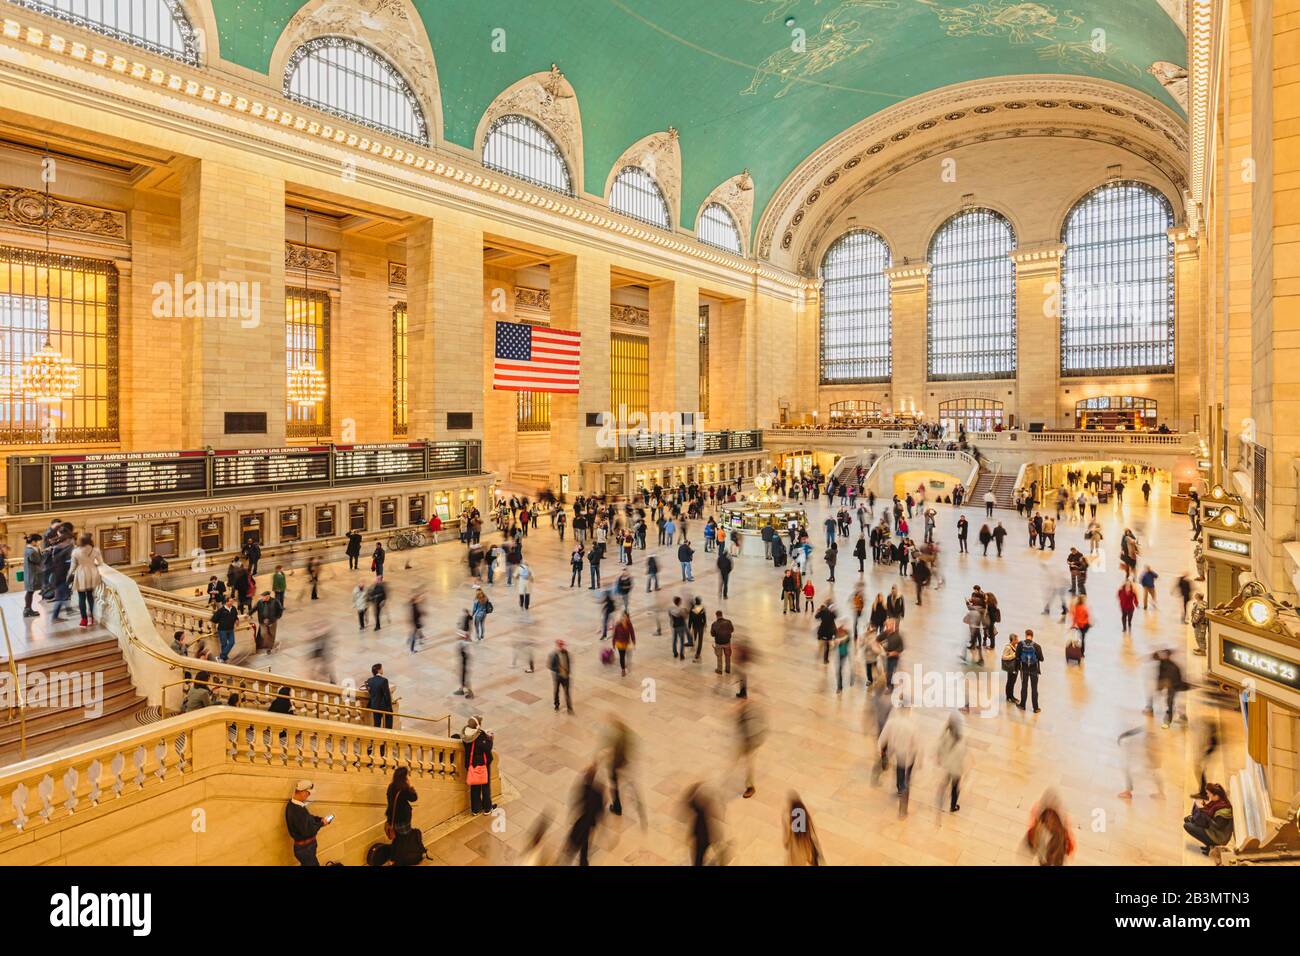 Main Concourse at Grand Central Terminal, New York City, New York State, United States of America.  The Terminal, opened in 1913, is designated a Nati Stock Photo